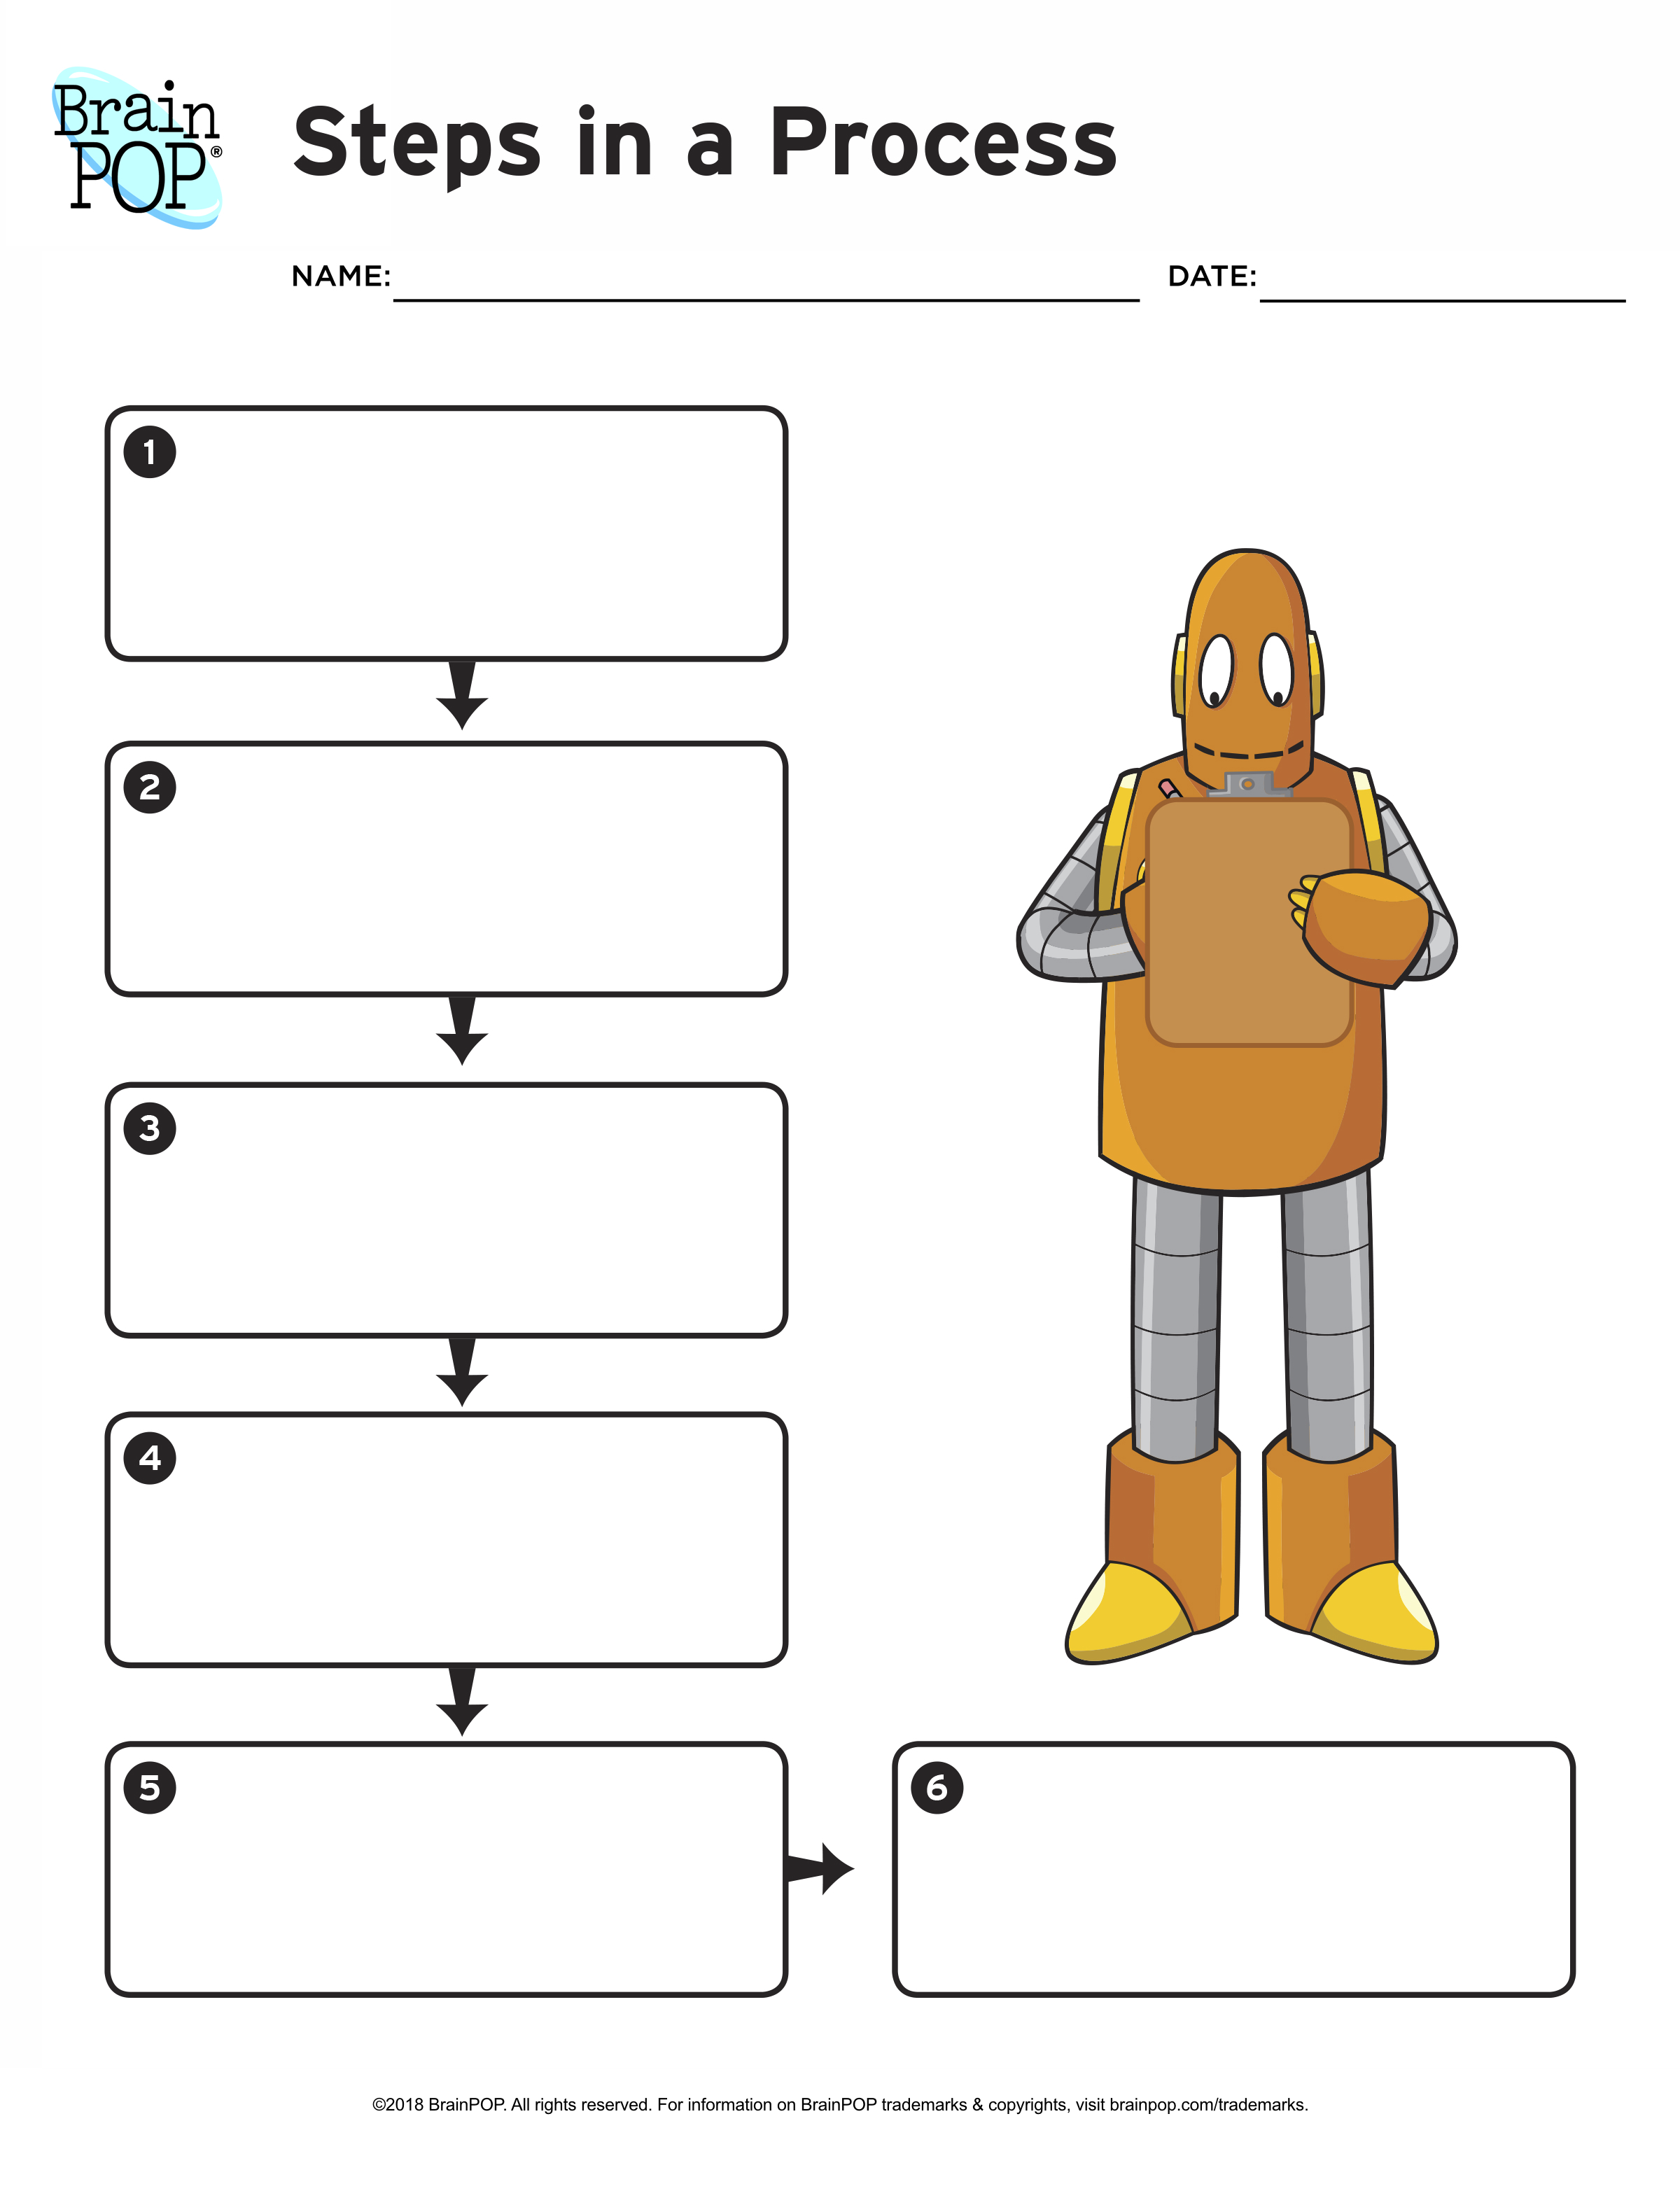 Steps in a Process Graphic Organizer